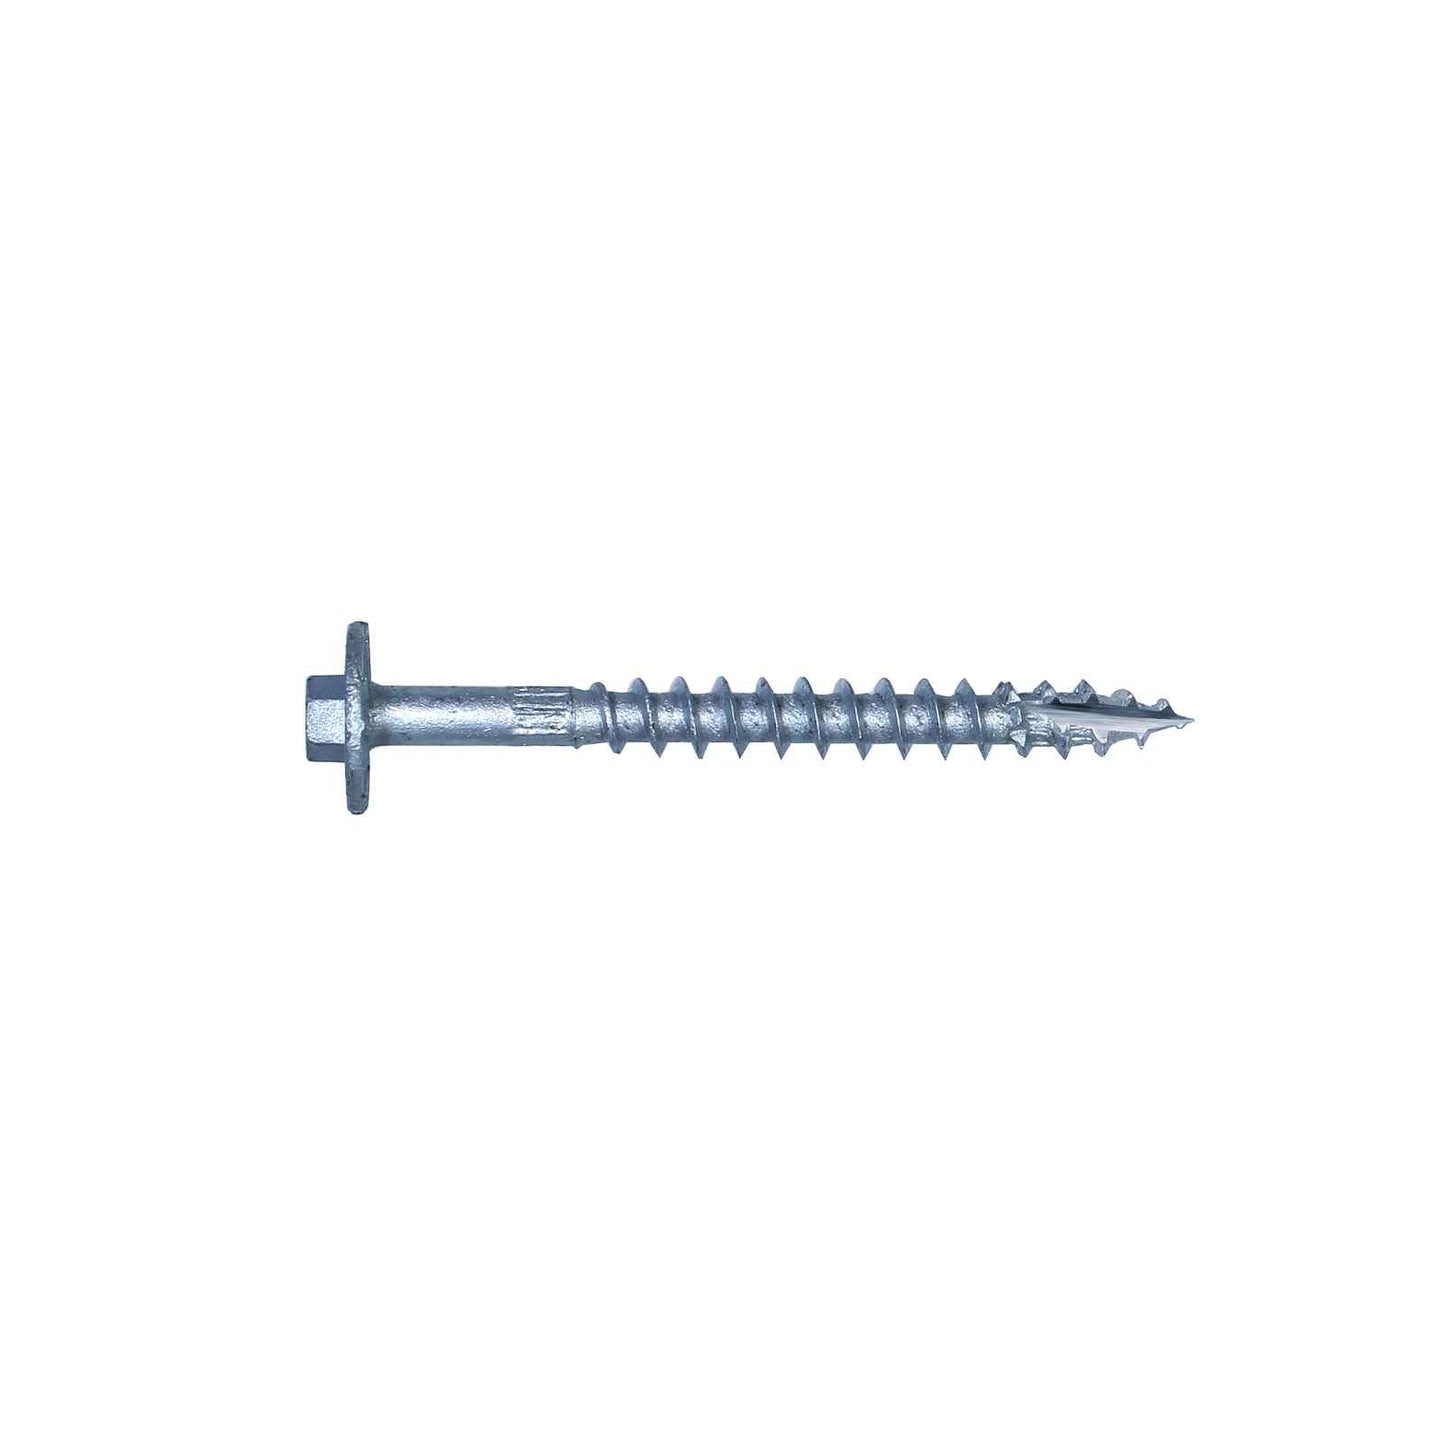 0.276" x 4" Strong-Tie SDWH27400G-RP1 Timber Hex Screw - Hot Dip Galvanized